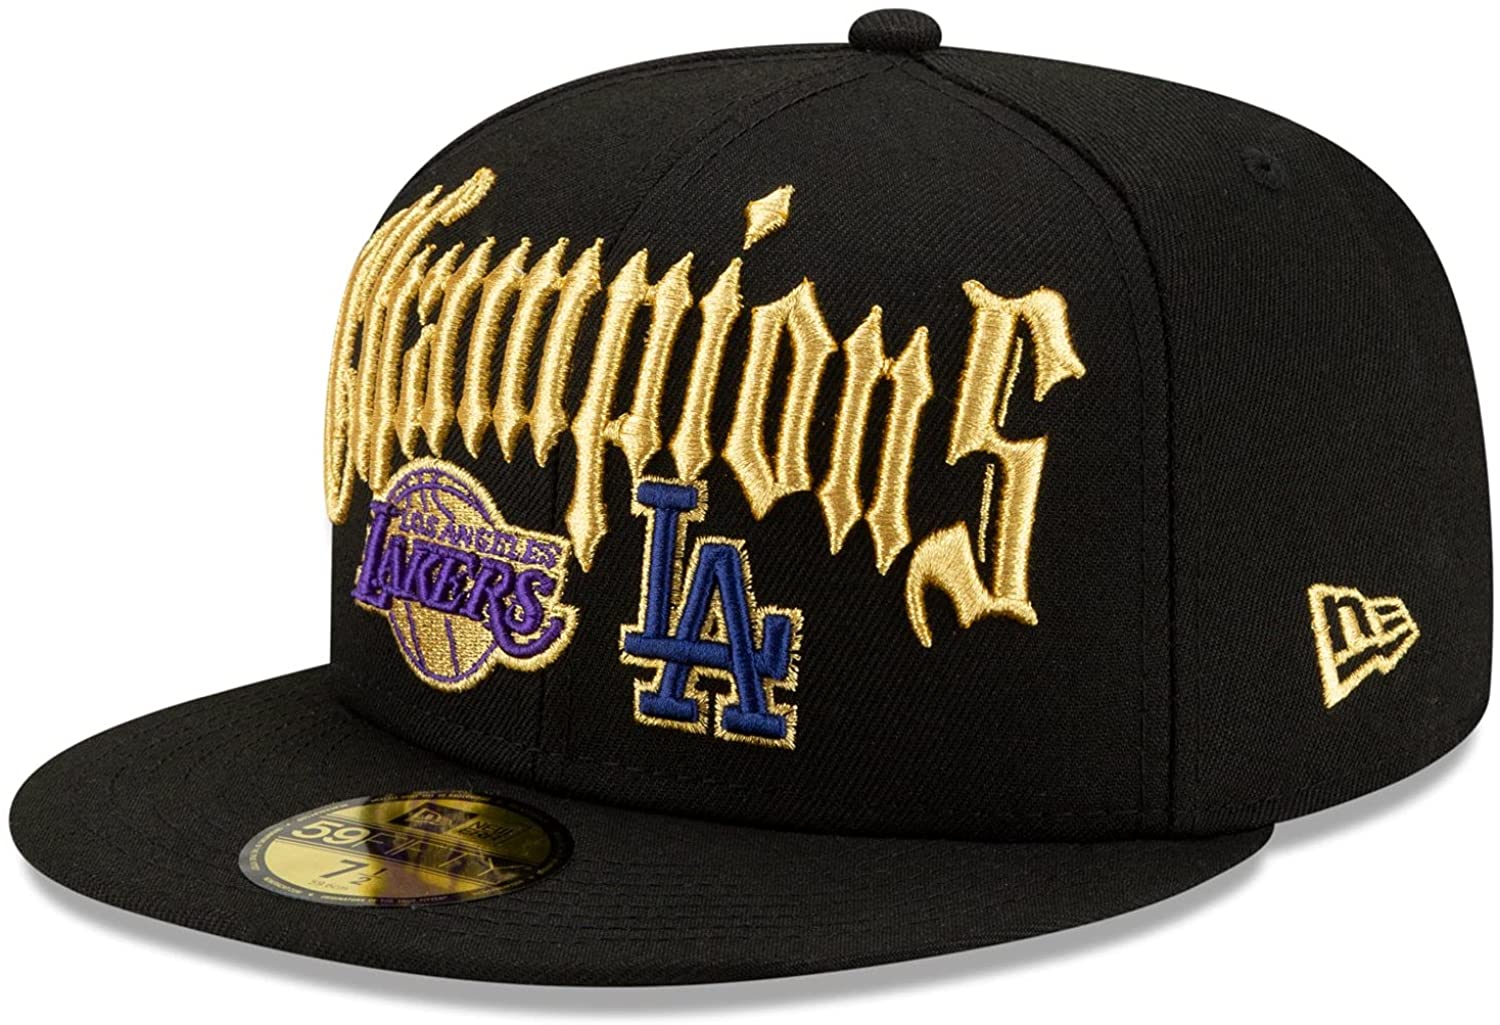 New Era 59FIFTY LA Los Angeles Dodgers Lakers Dual Champions Split 2020 Championships Black Gold Fitted Cap